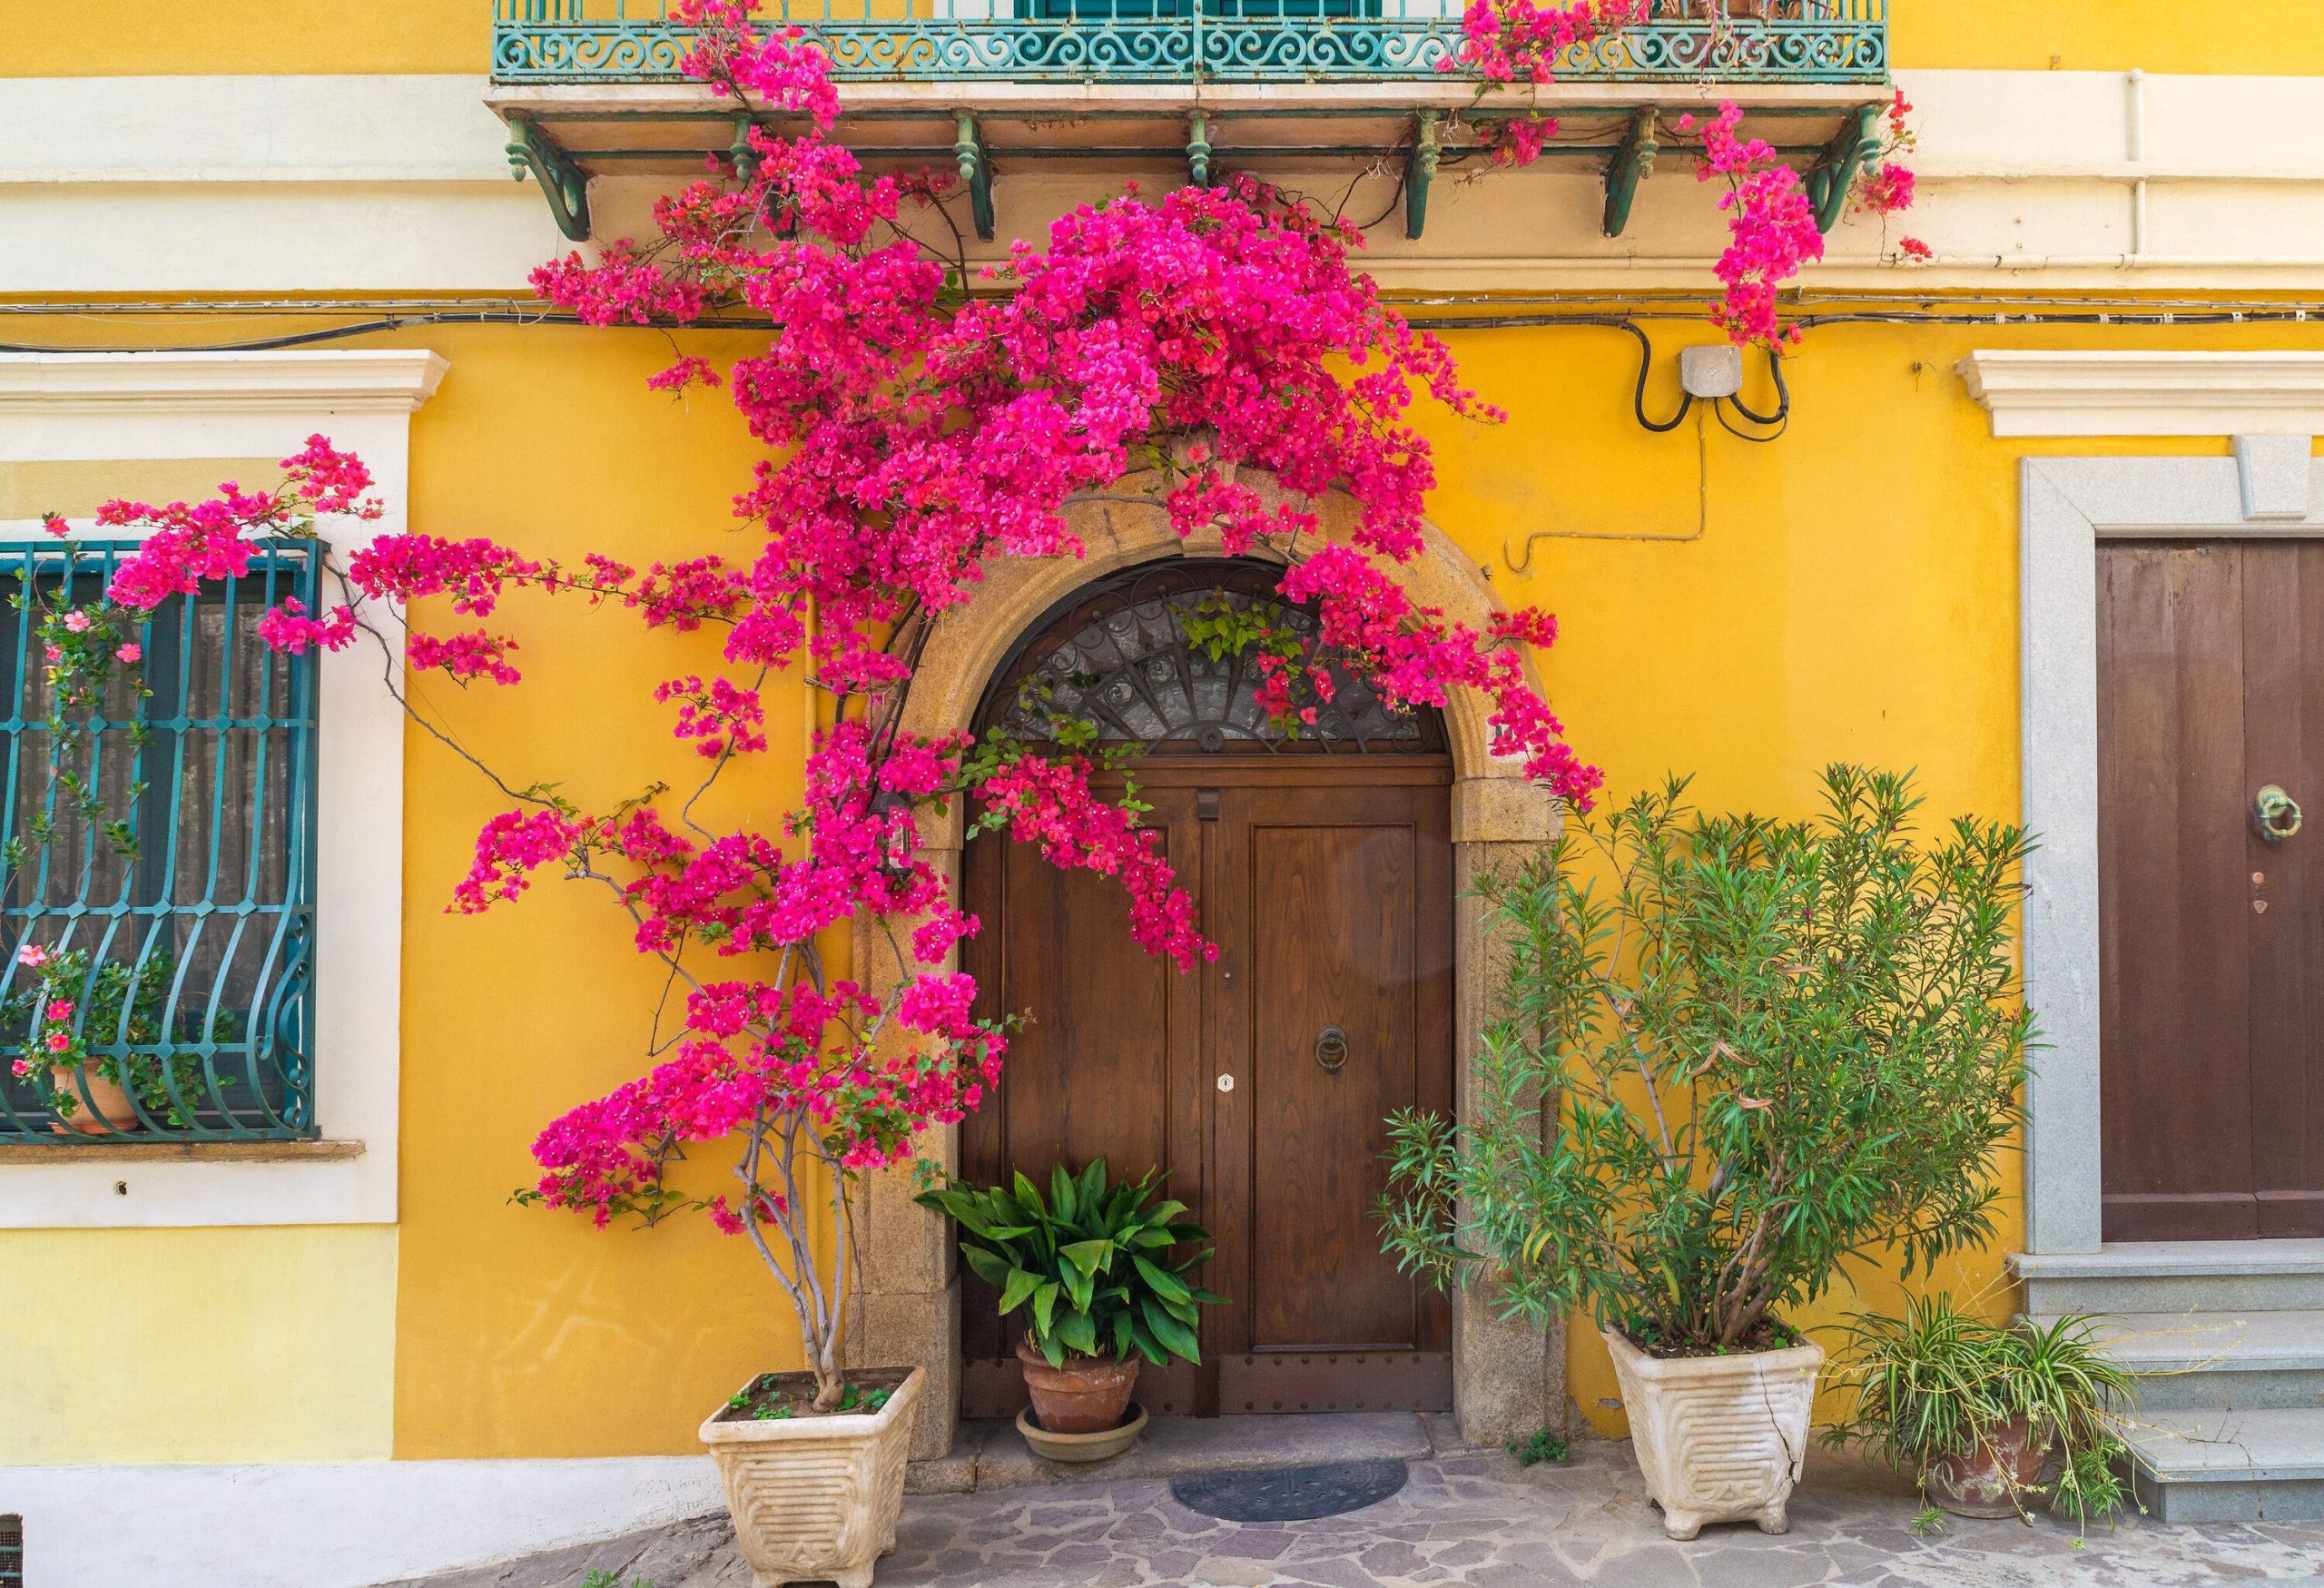 A house with yellow walls and a wooden door with pink bougainvillaea flowers beside it.